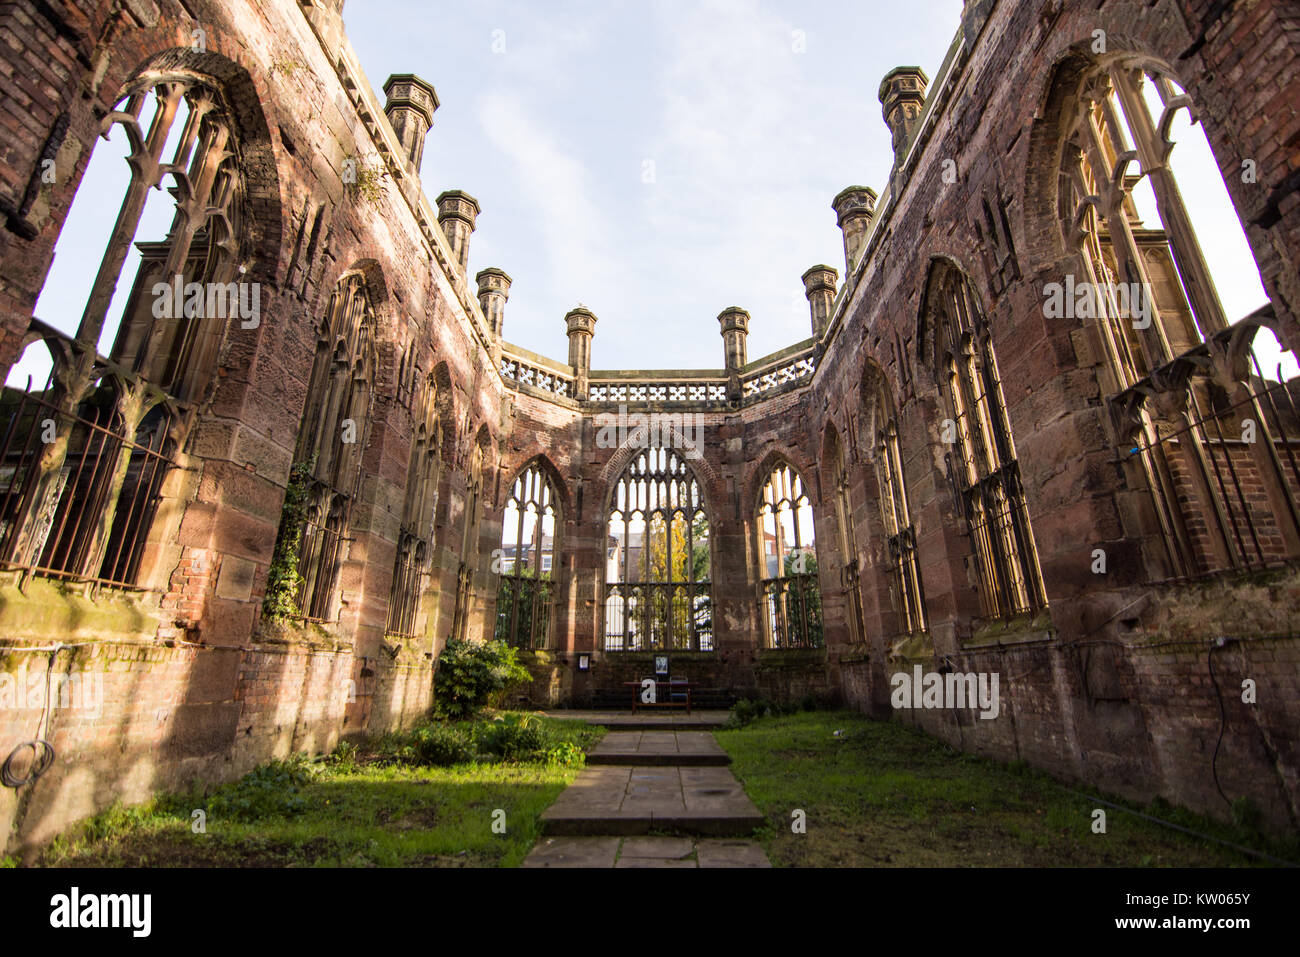 Bombed Out Building Stock Photos & Bombed Out Building Stock Images - Alamy1300 x 957